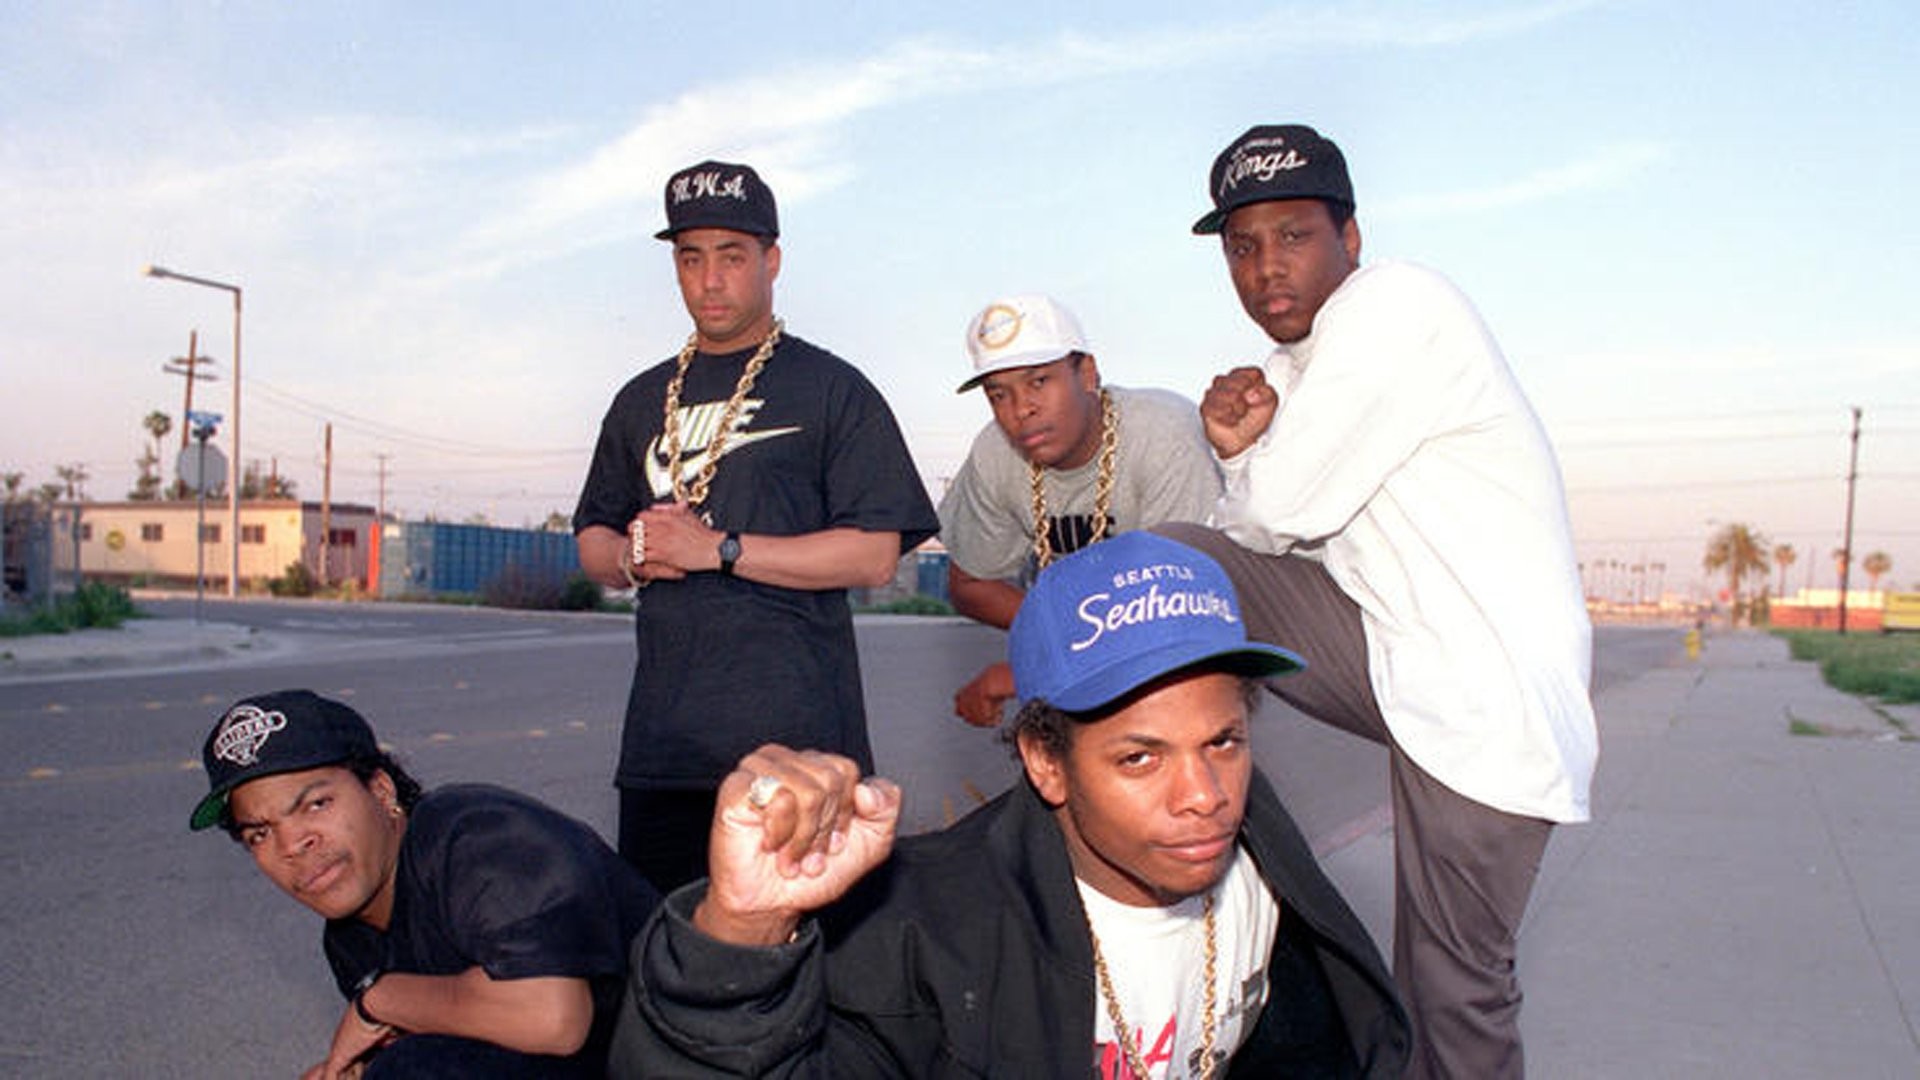 1920x1080 Members of rap group N.W.A are seen in this 1989 file photo. Back, from  left: D.J. Yella, Dr. Dre & MC Ren. Front, from left: Ice Cube and Easy E.  (Credit: ...